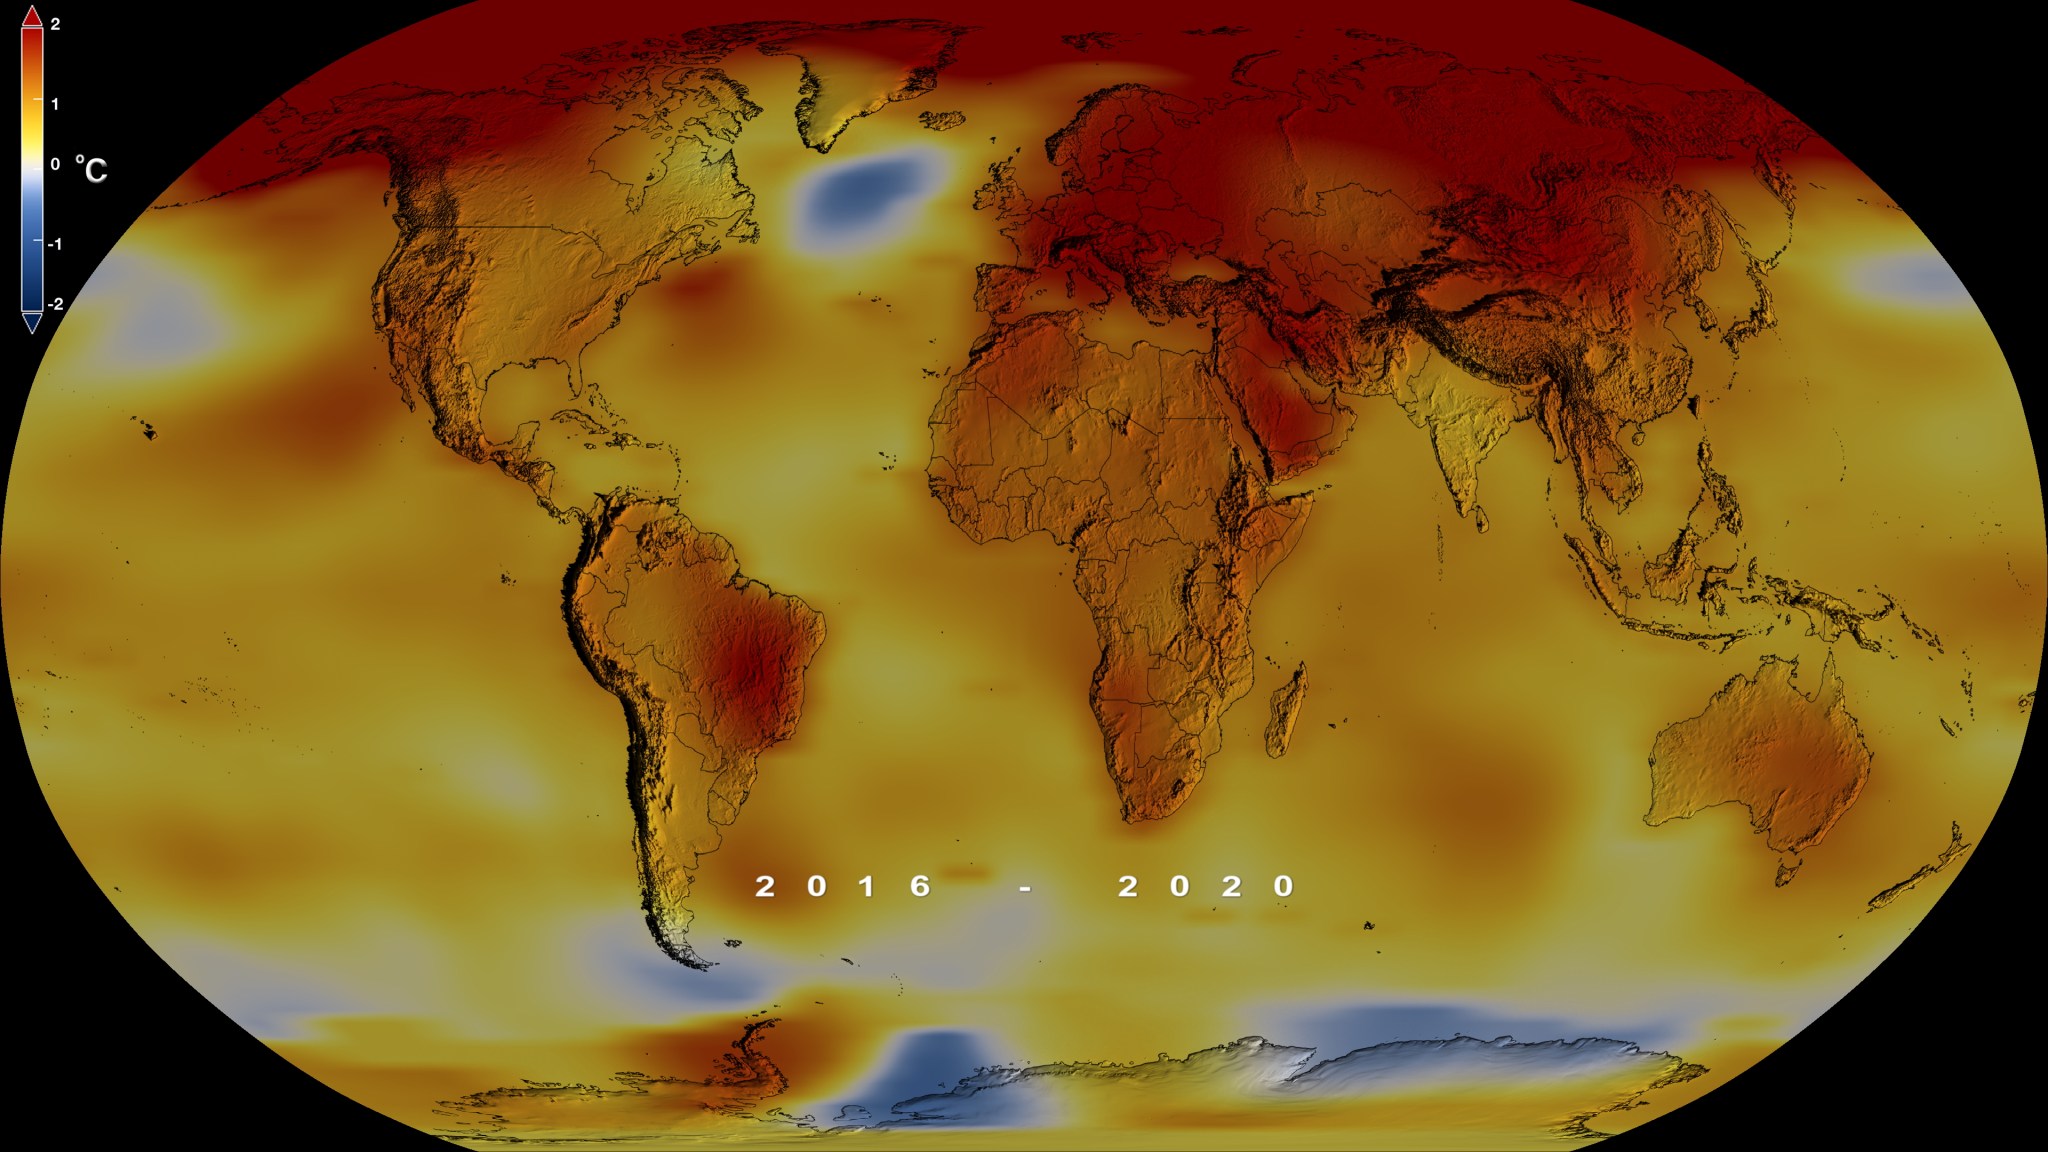 Global temperature anomalies for 2020 from the NASA GISS analysis